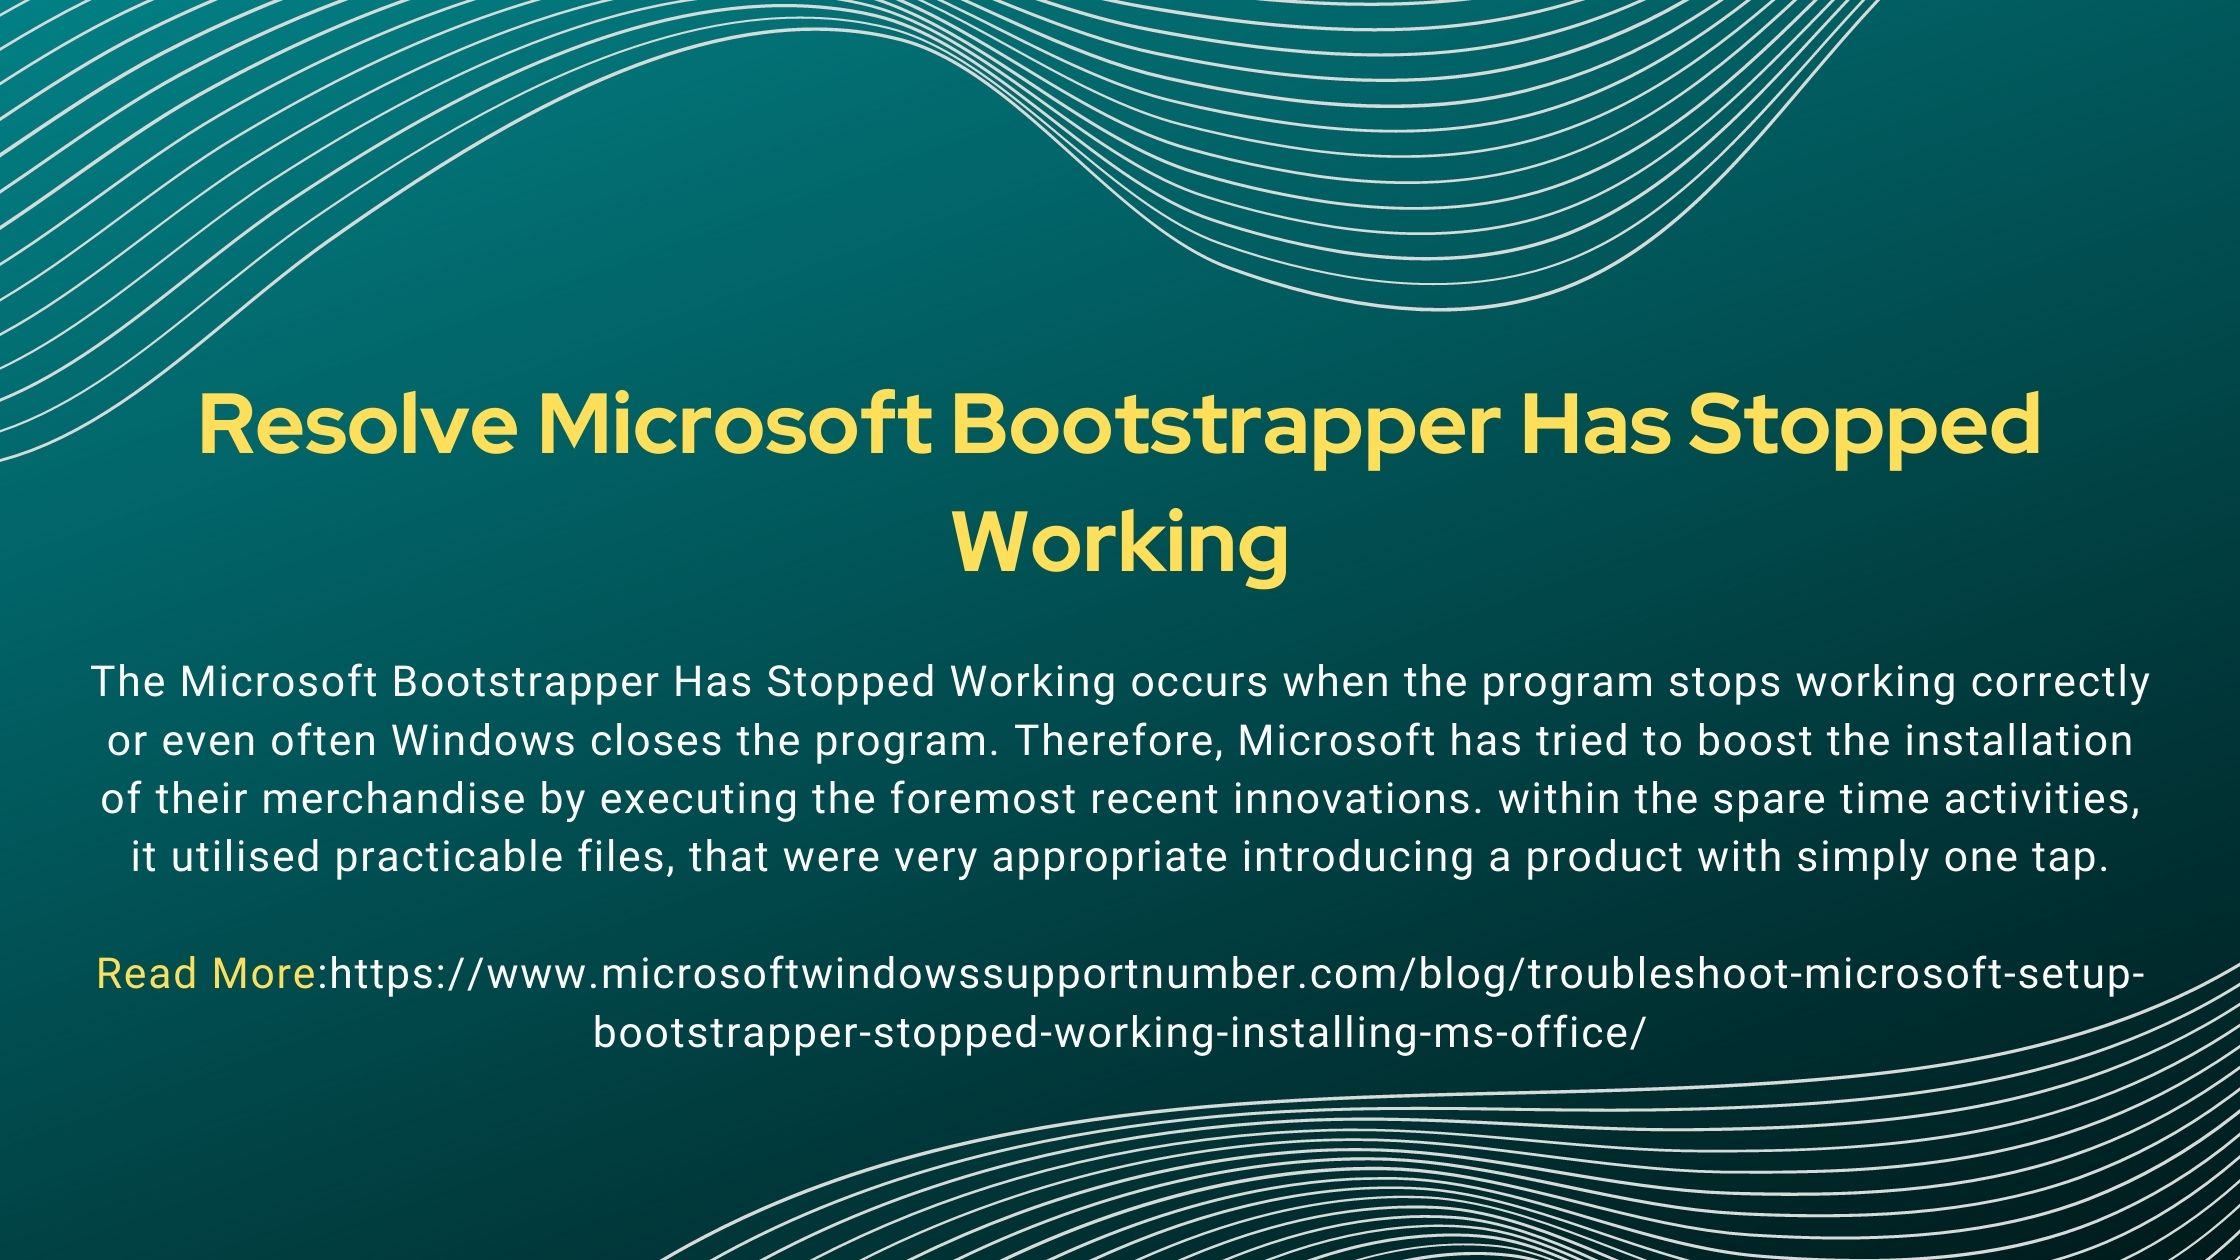 Resolve Microsoft Bootstrapper Has Stopped Working